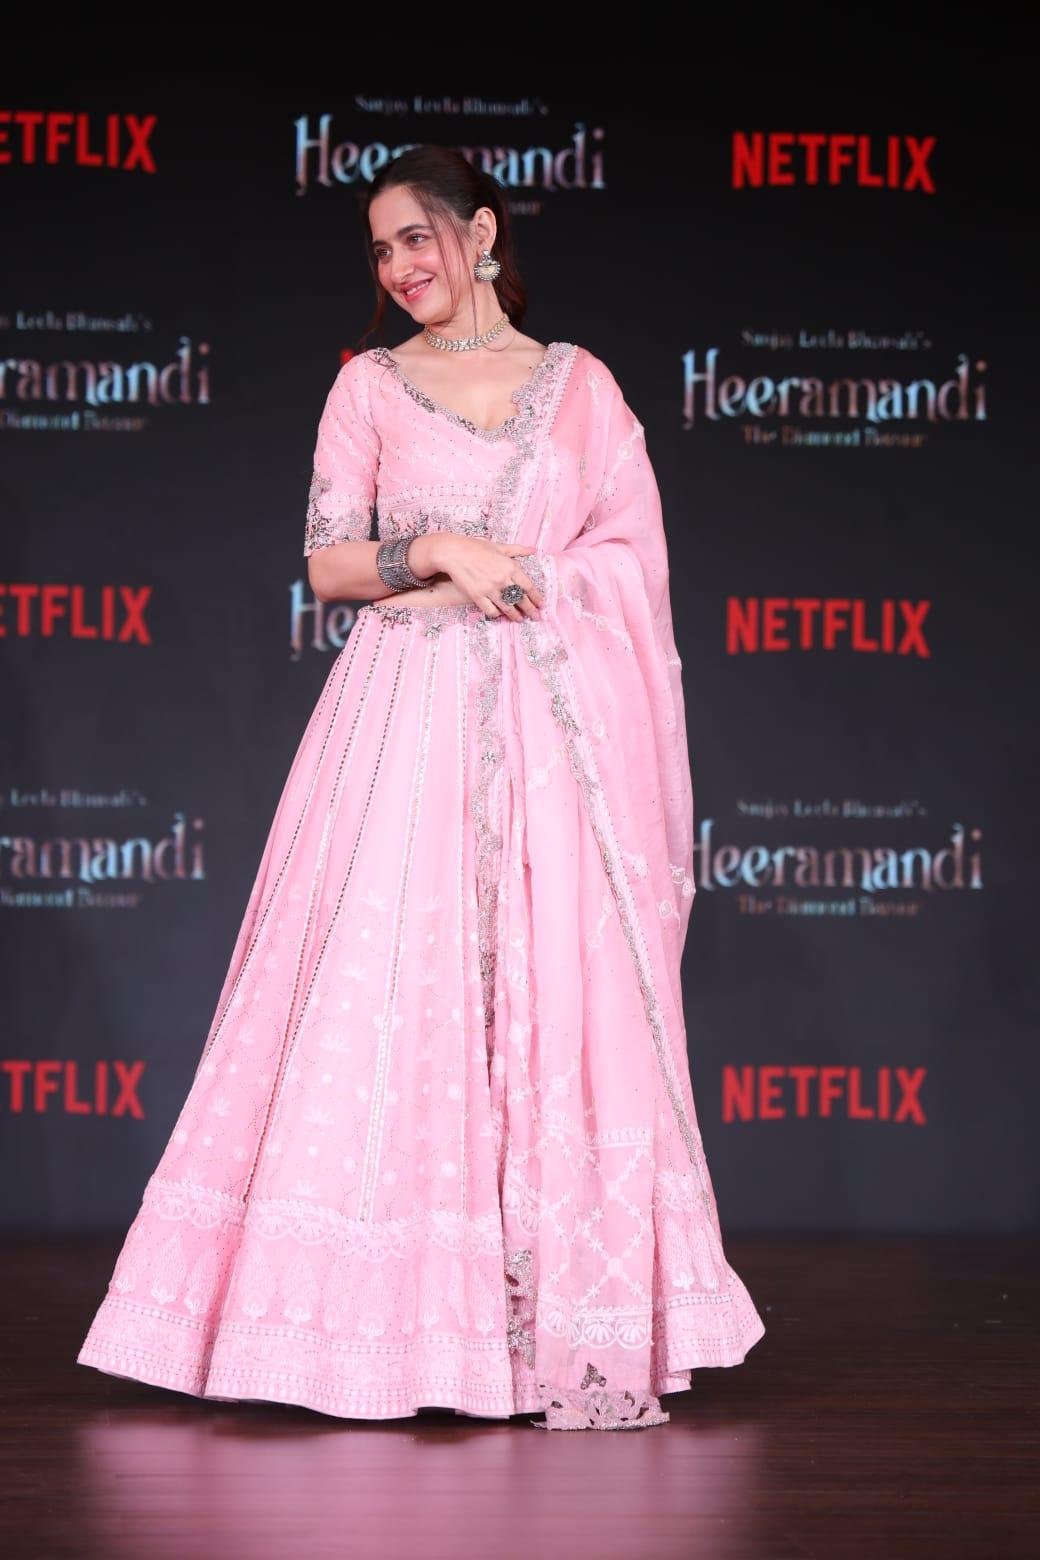 Sanjeeda Shaikh showcased oomph fashion at the Heeramandi trailer launch event in a gorgeous all-pink lehenga. The actress kept her makeup simple and tied her hair in a sleek ponytail to complete her look